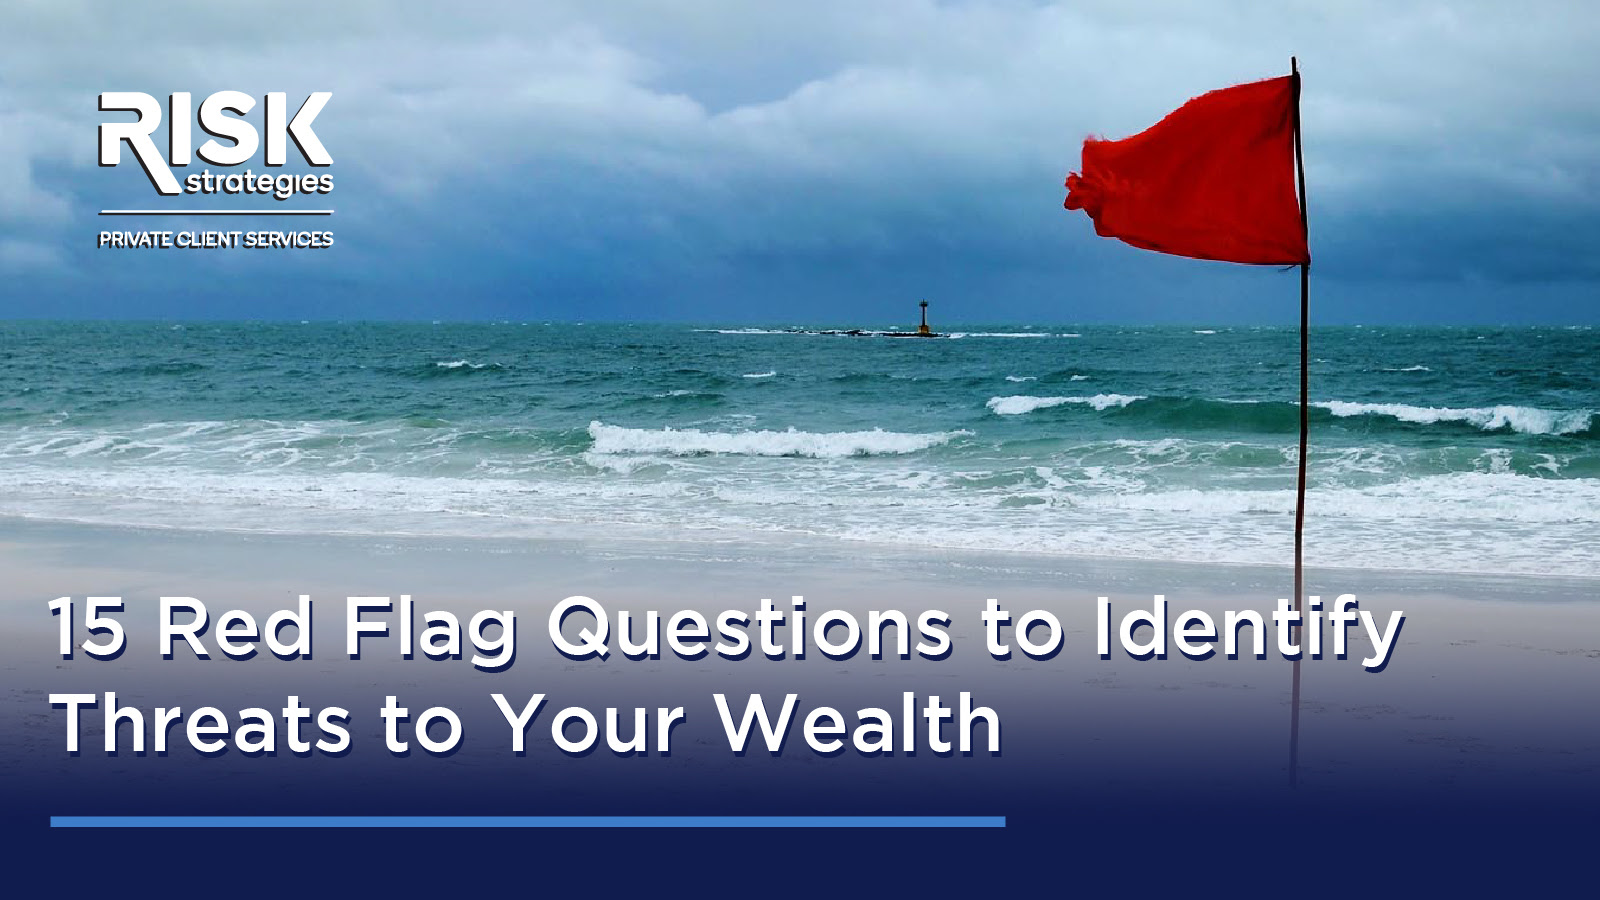 15 Red Flag Questions to Identify Threats to Your Wealth